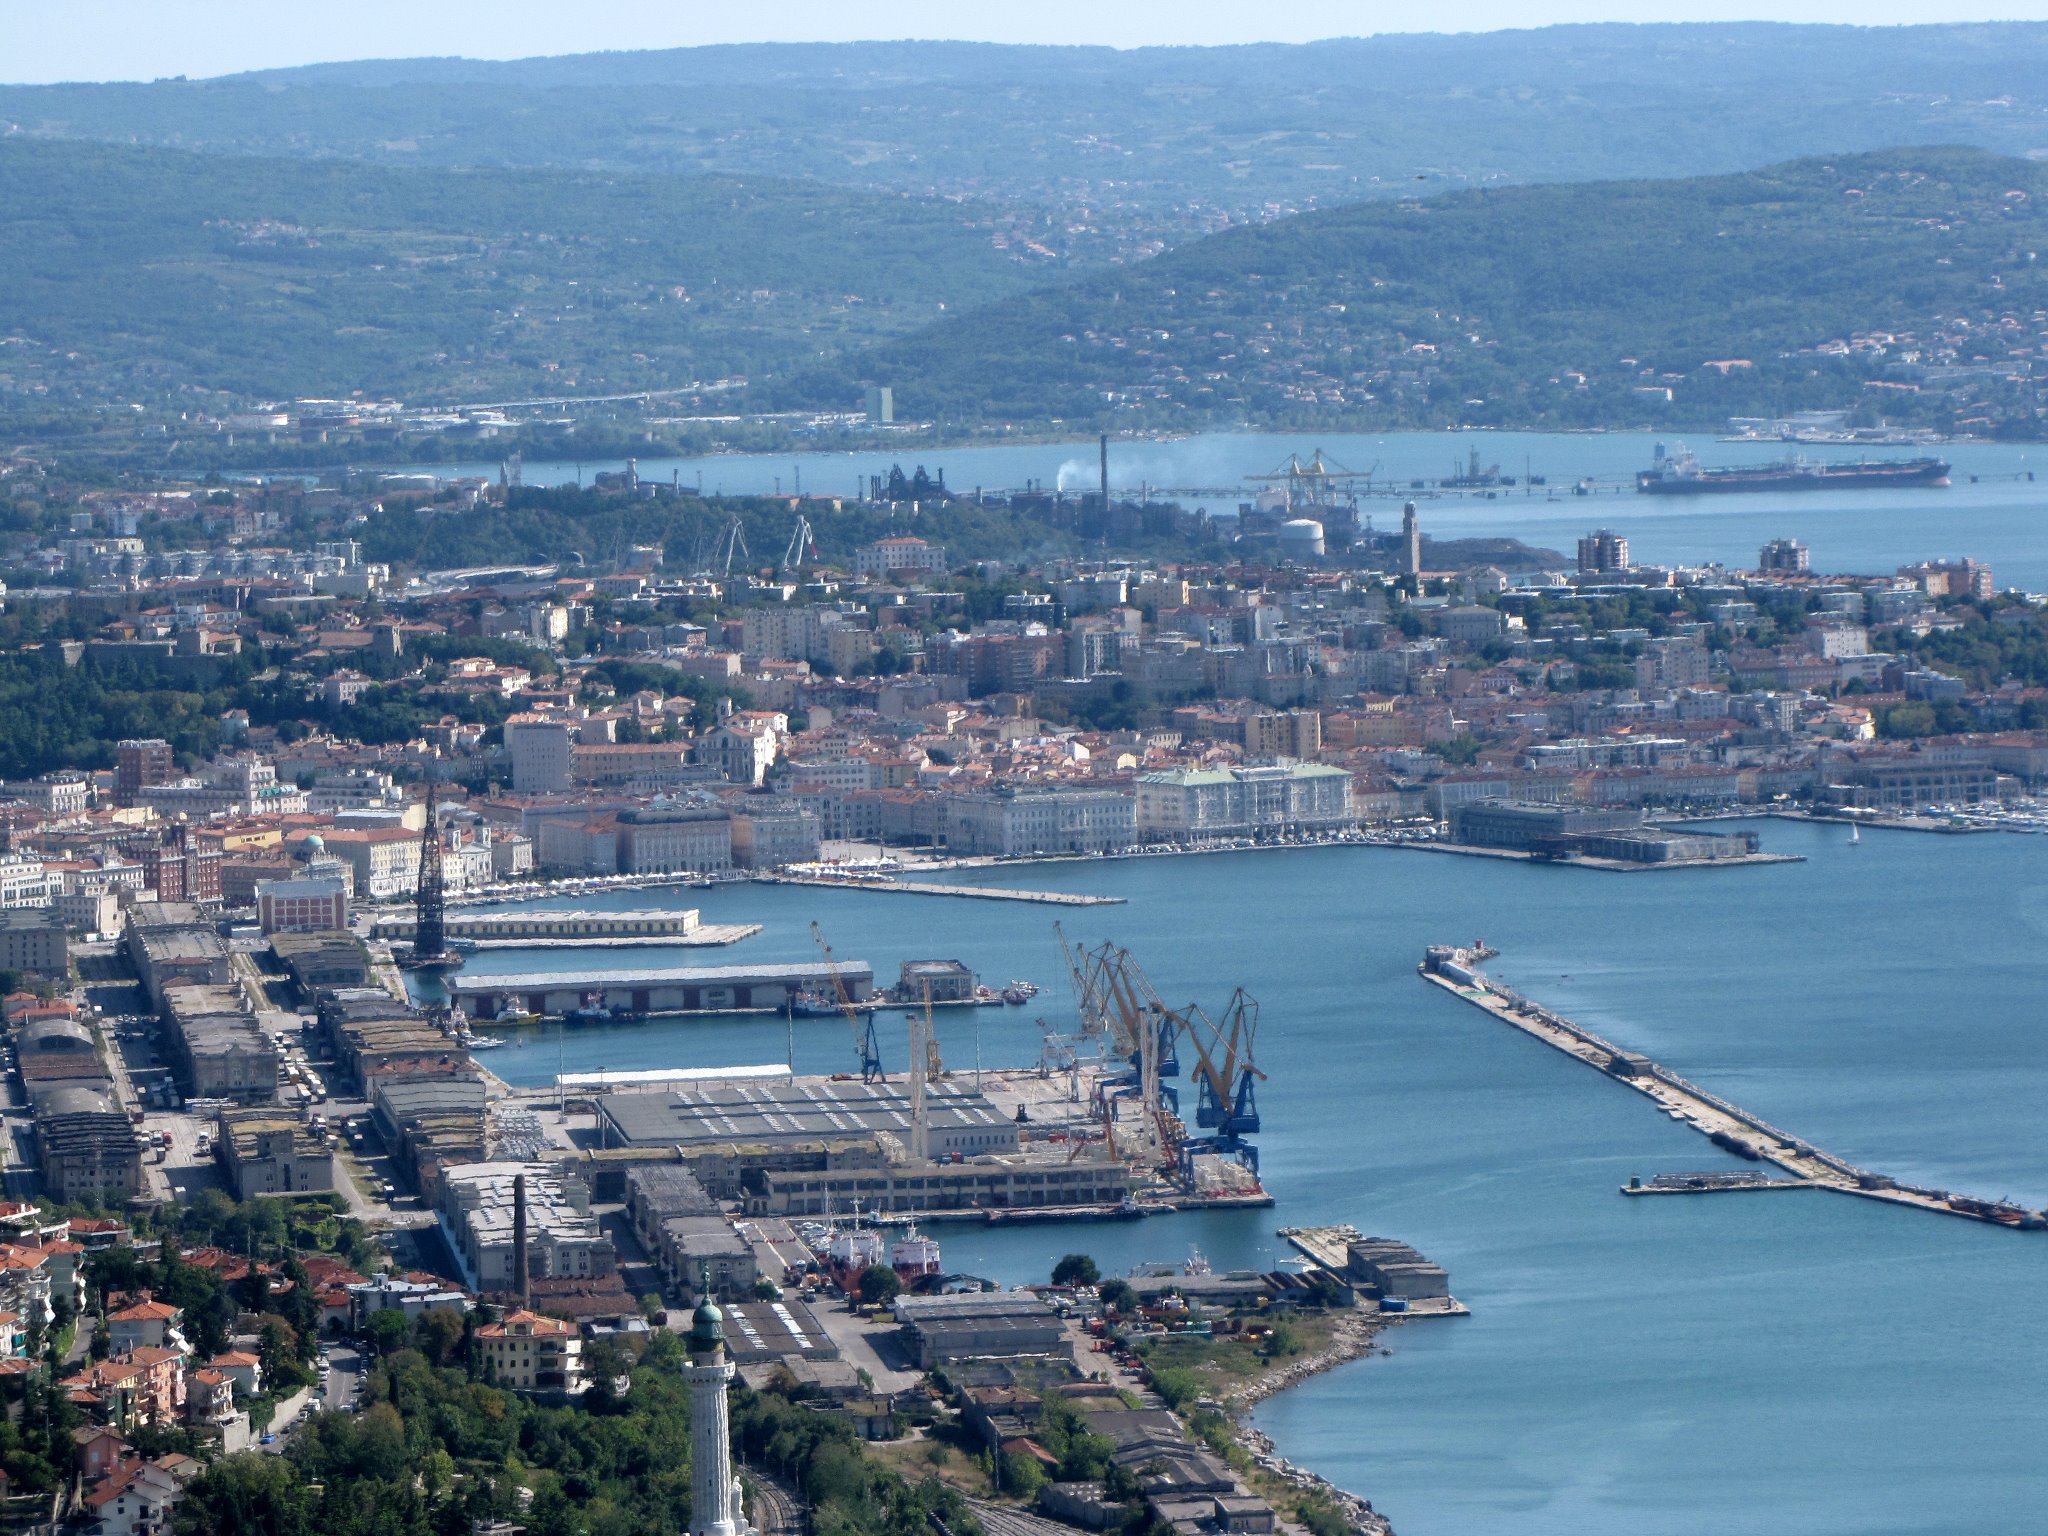 TRIAL AGAINST THE INTERNATIONAL FREE PORT OF TRIESTE